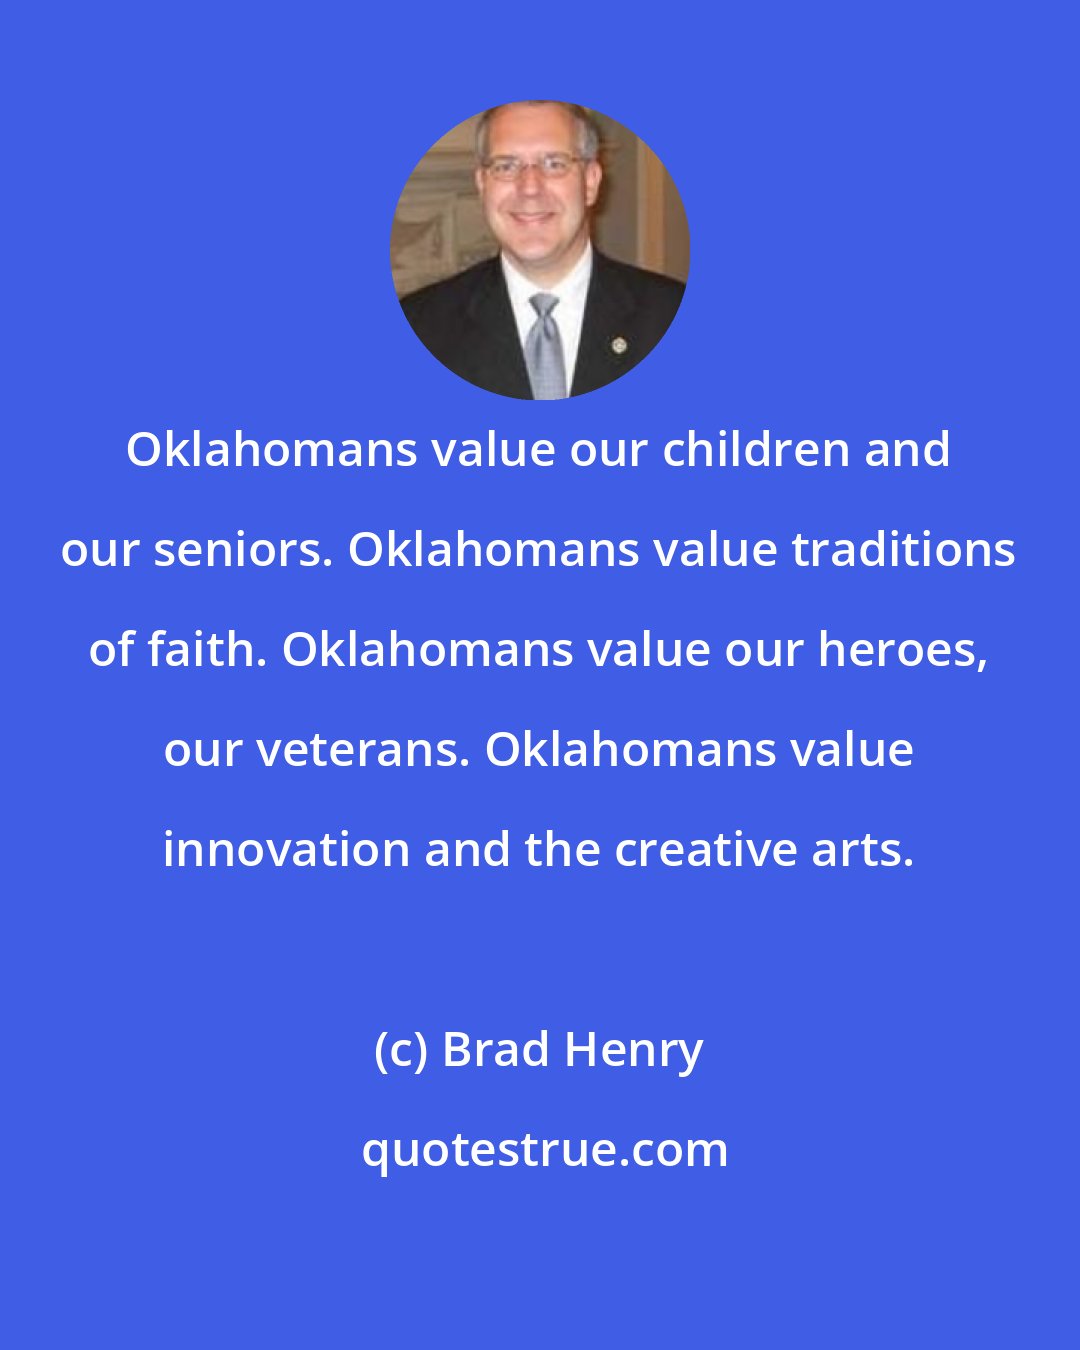 Brad Henry: Oklahomans value our children and our seniors. Oklahomans value traditions of faith. Oklahomans value our heroes, our veterans. Oklahomans value innovation and the creative arts.